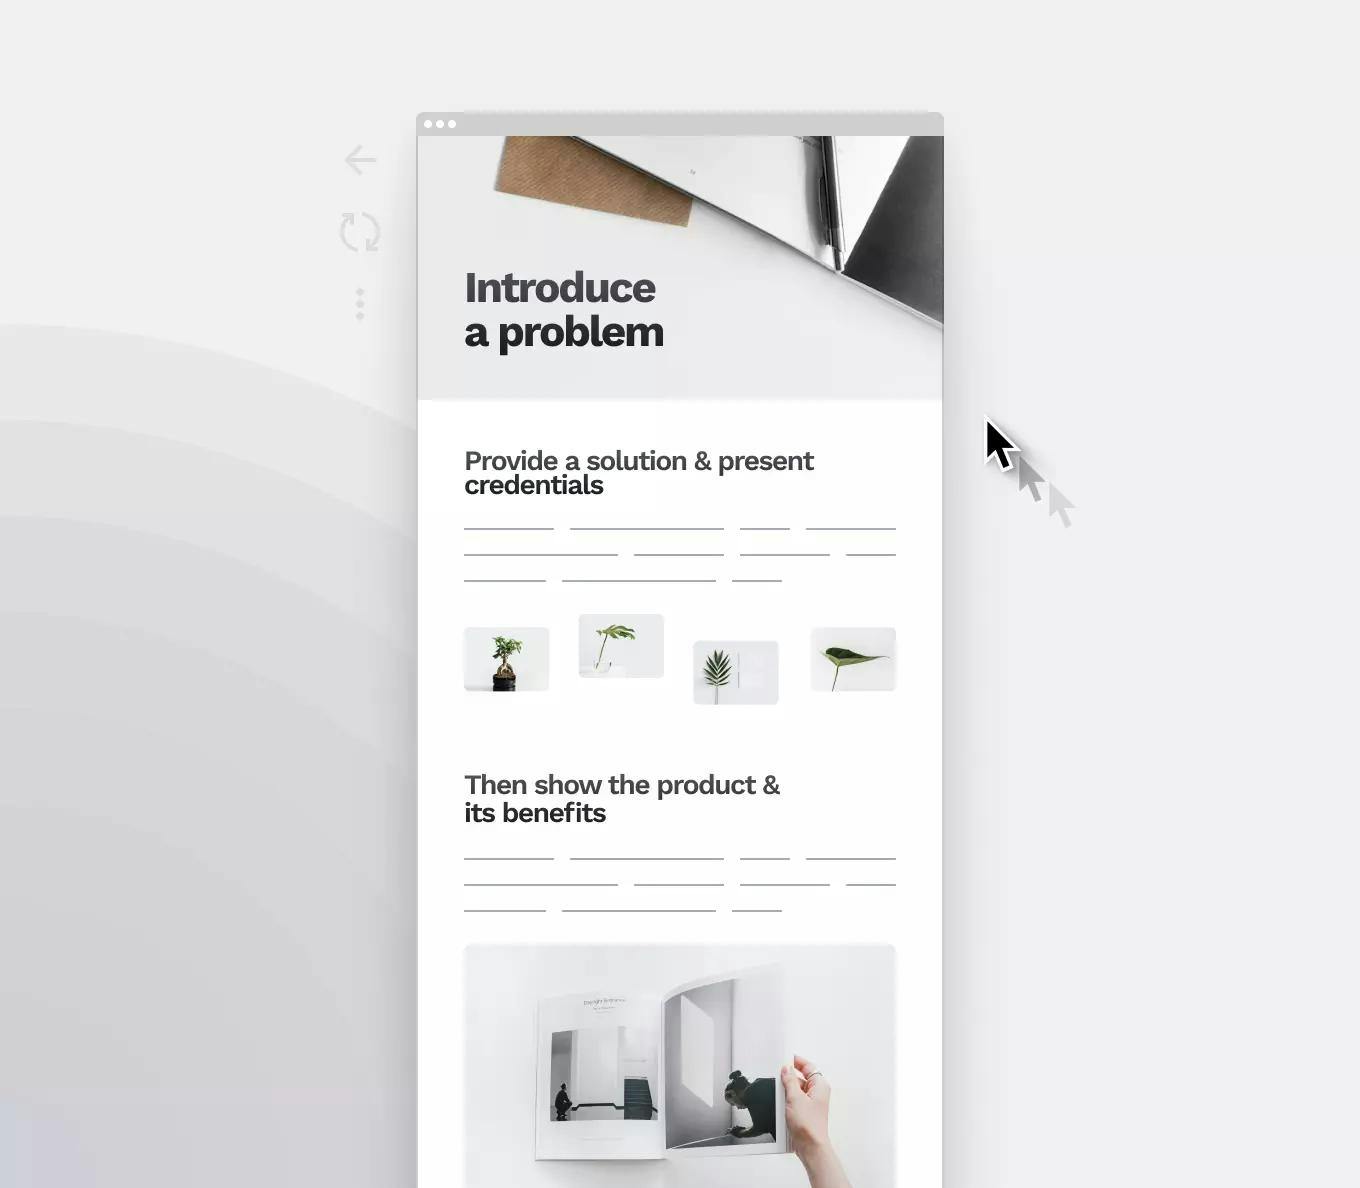 A sales page sample template that shows how to write and structure one: introduce a problem the customer is facing, provide a solution, and show the product and its benefits.